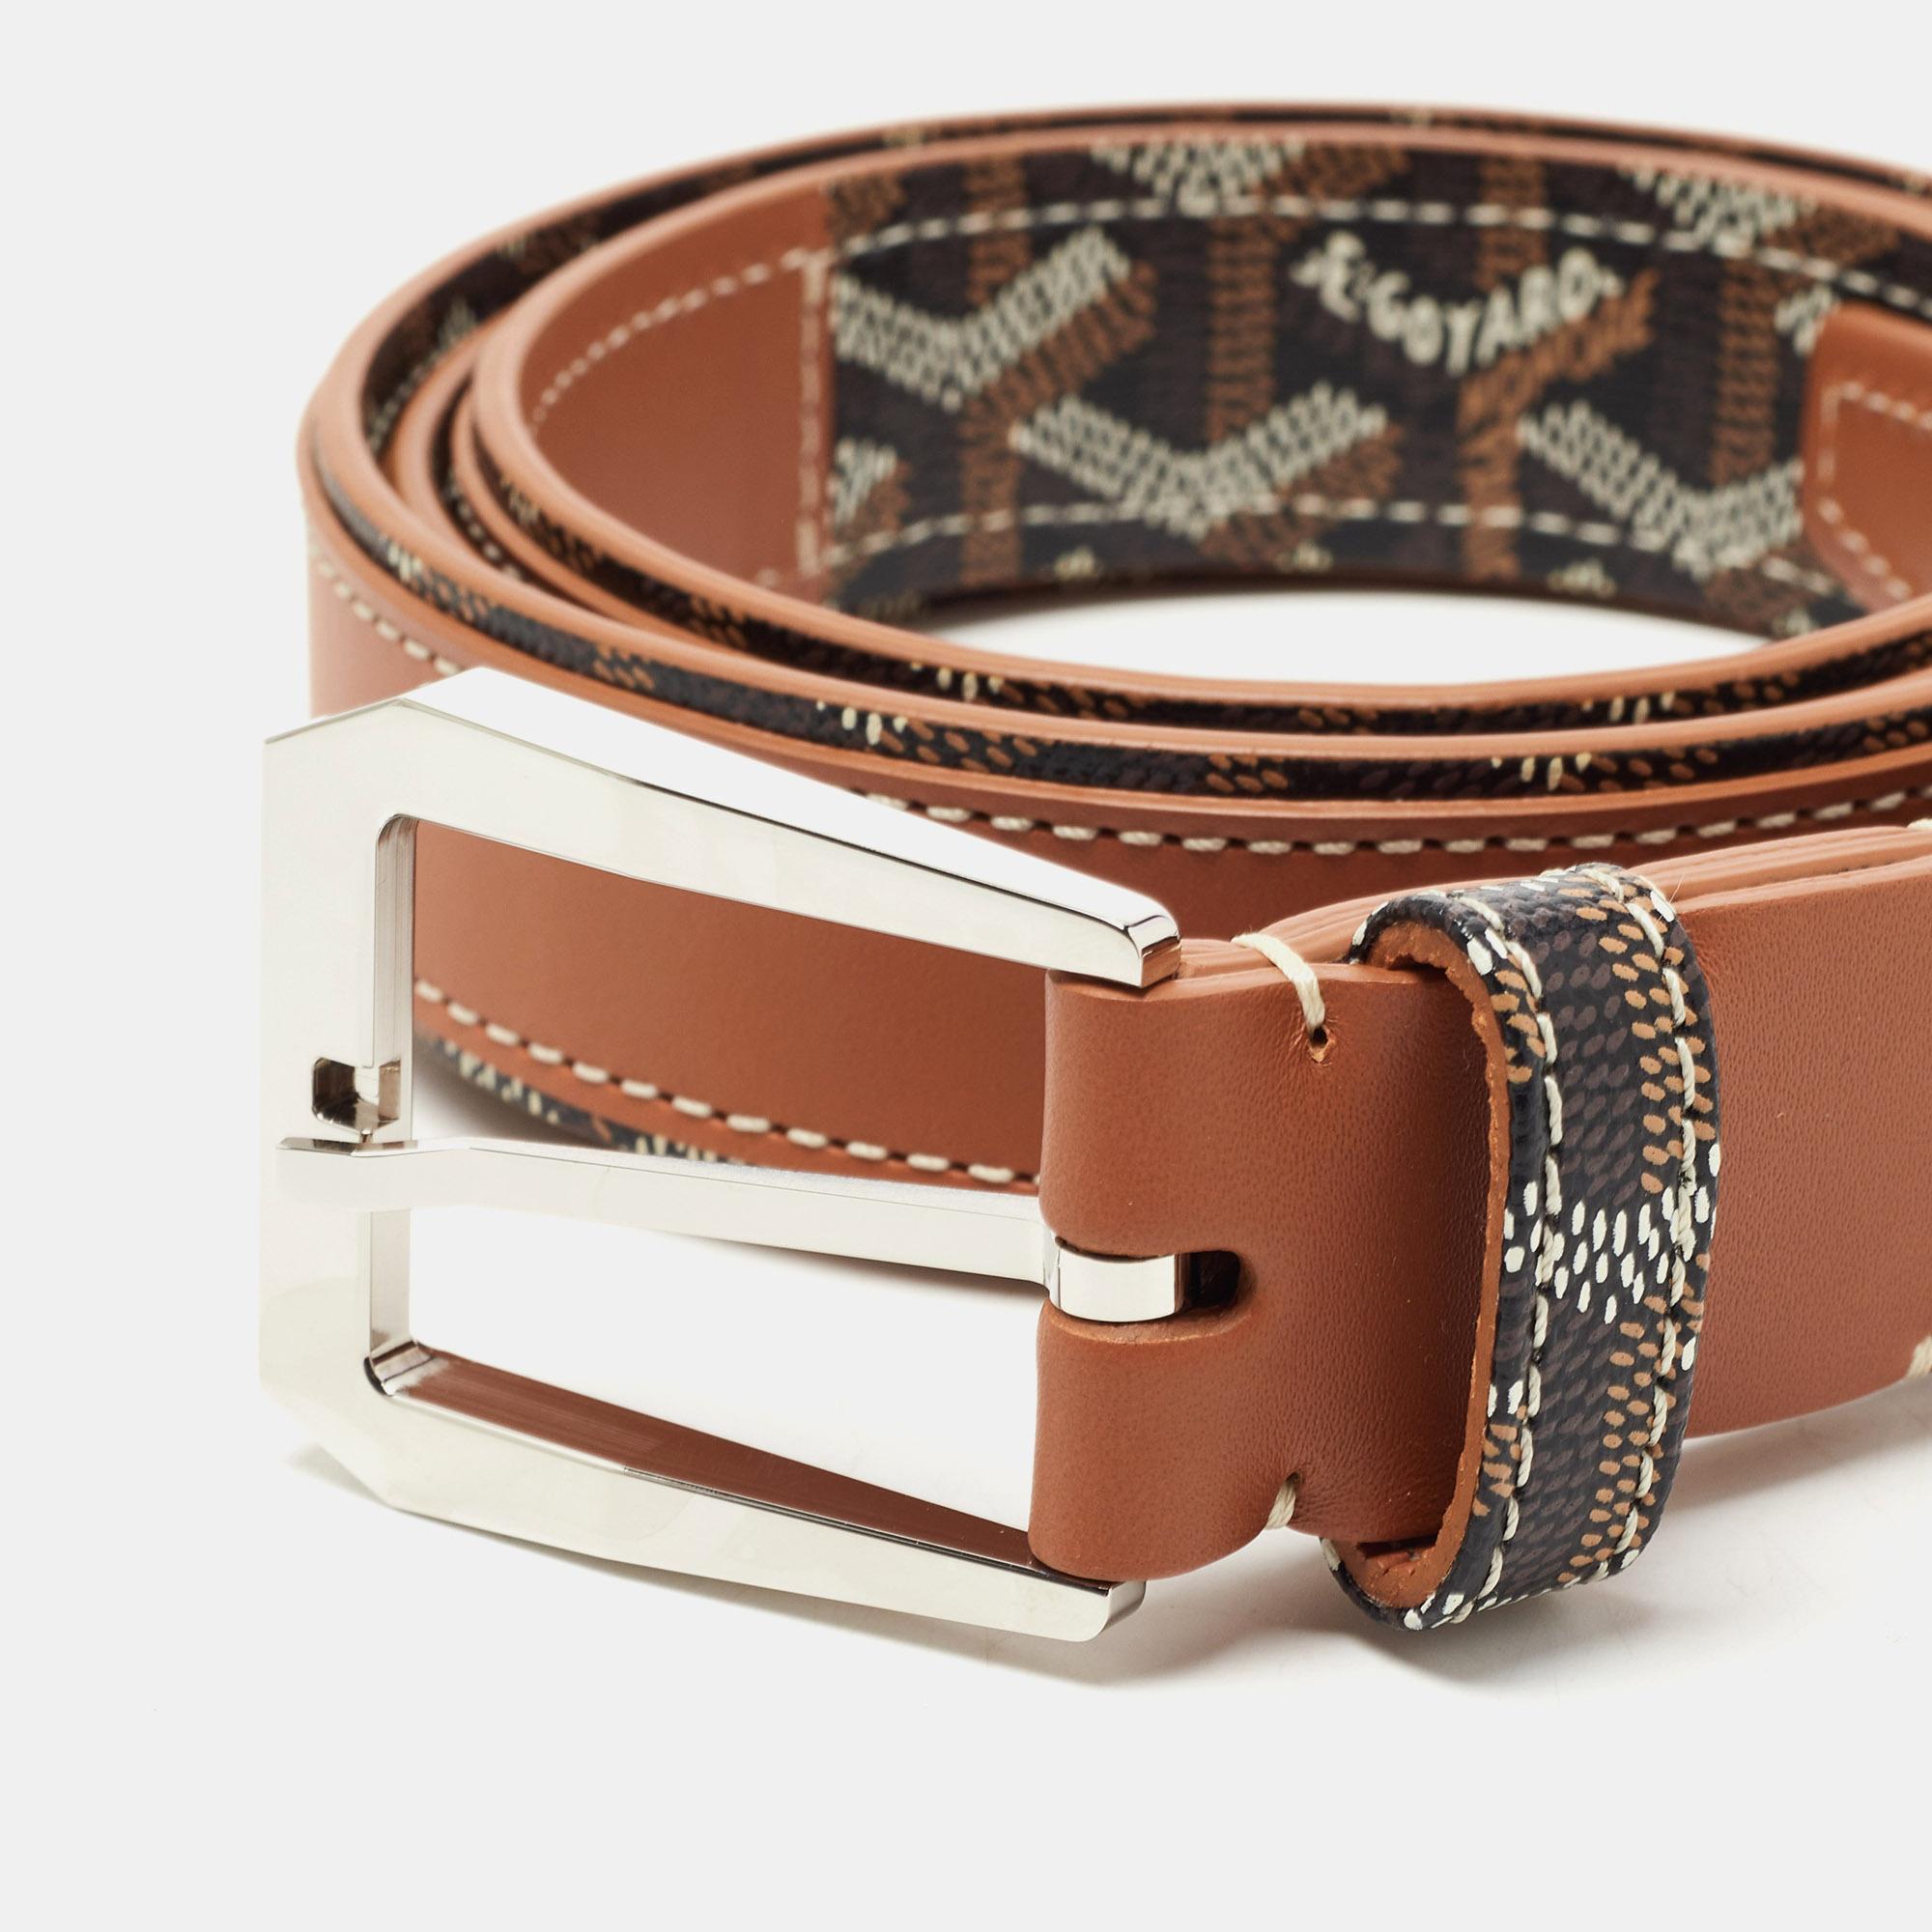 A classic add-on to your collection of belts is this Goyard piece. Cut to a convenient length, the belt has a smooth finish and a sturdy built. This wardrobe essential piece will continually complement your style.

Includes: Original Dustbag,